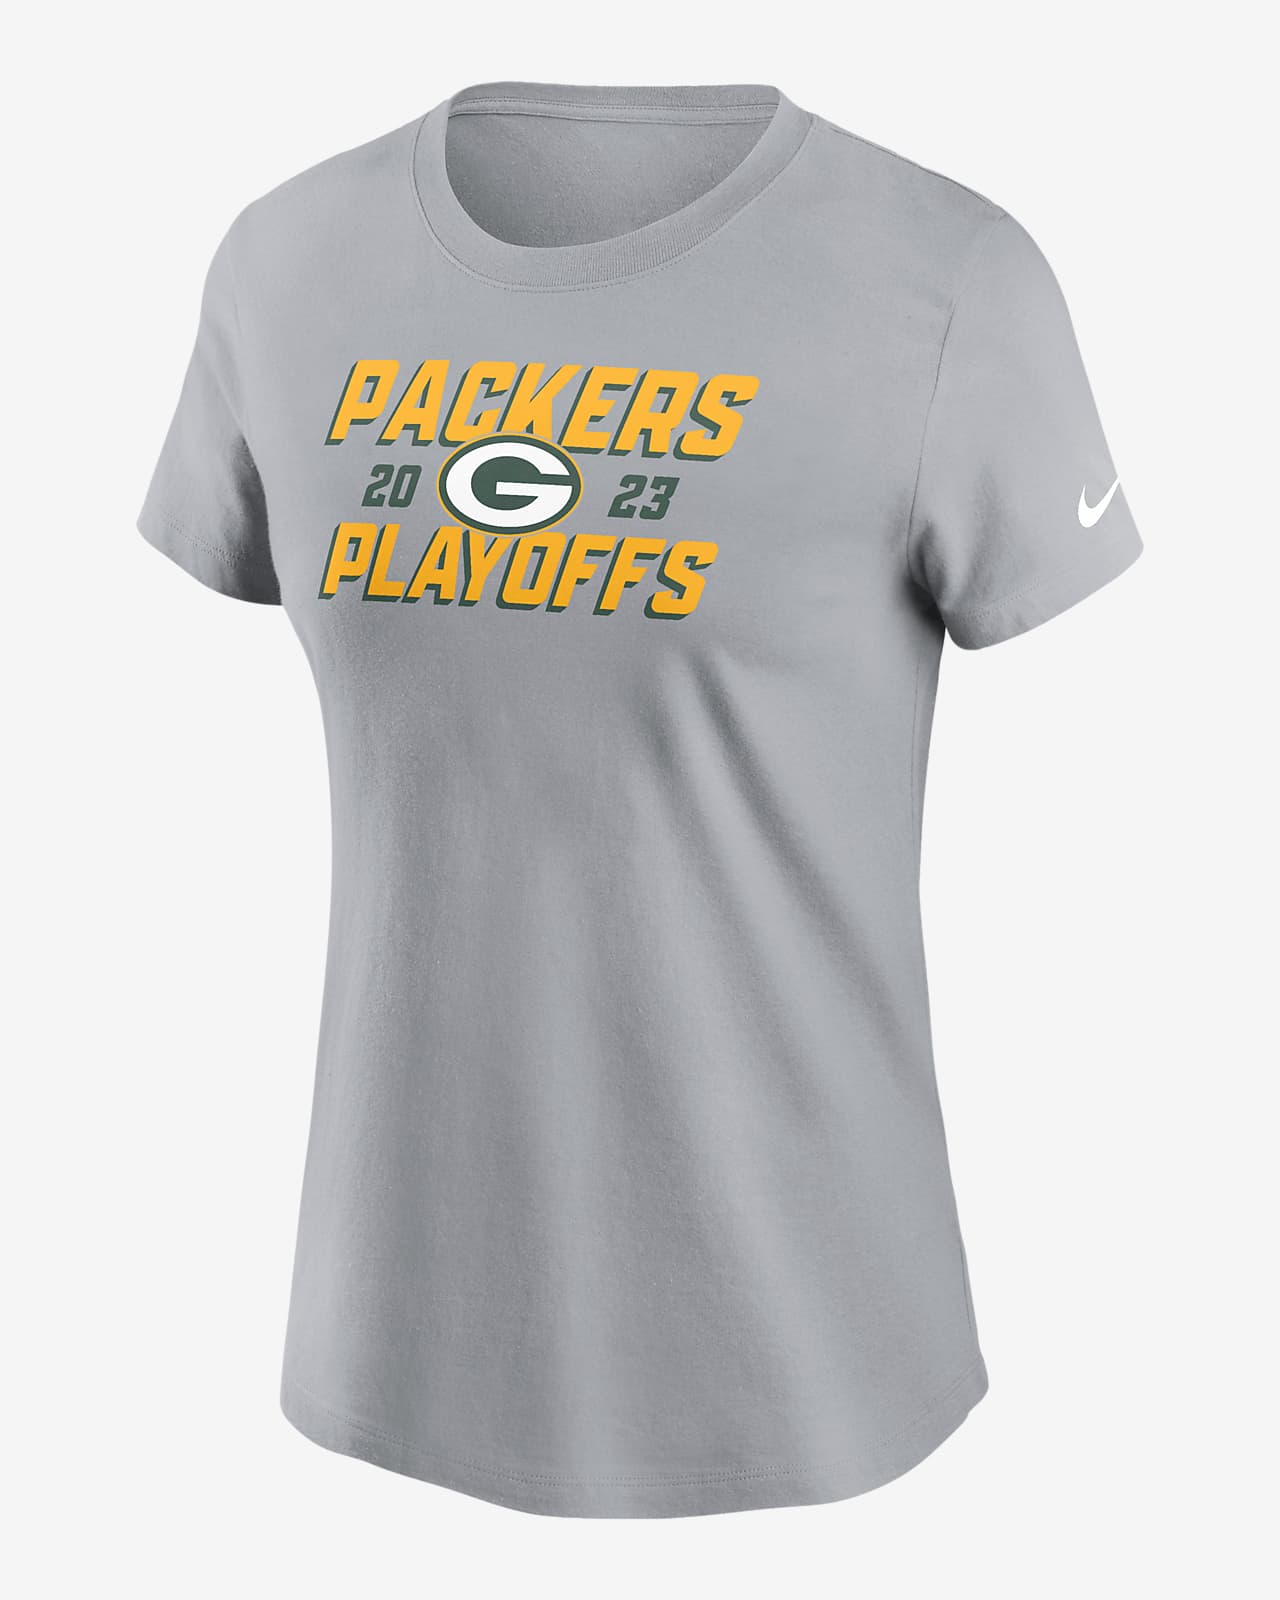 Green Bay Packers 2023 NFL Playoffs Iconic Women's Nike NFL T-Shirt